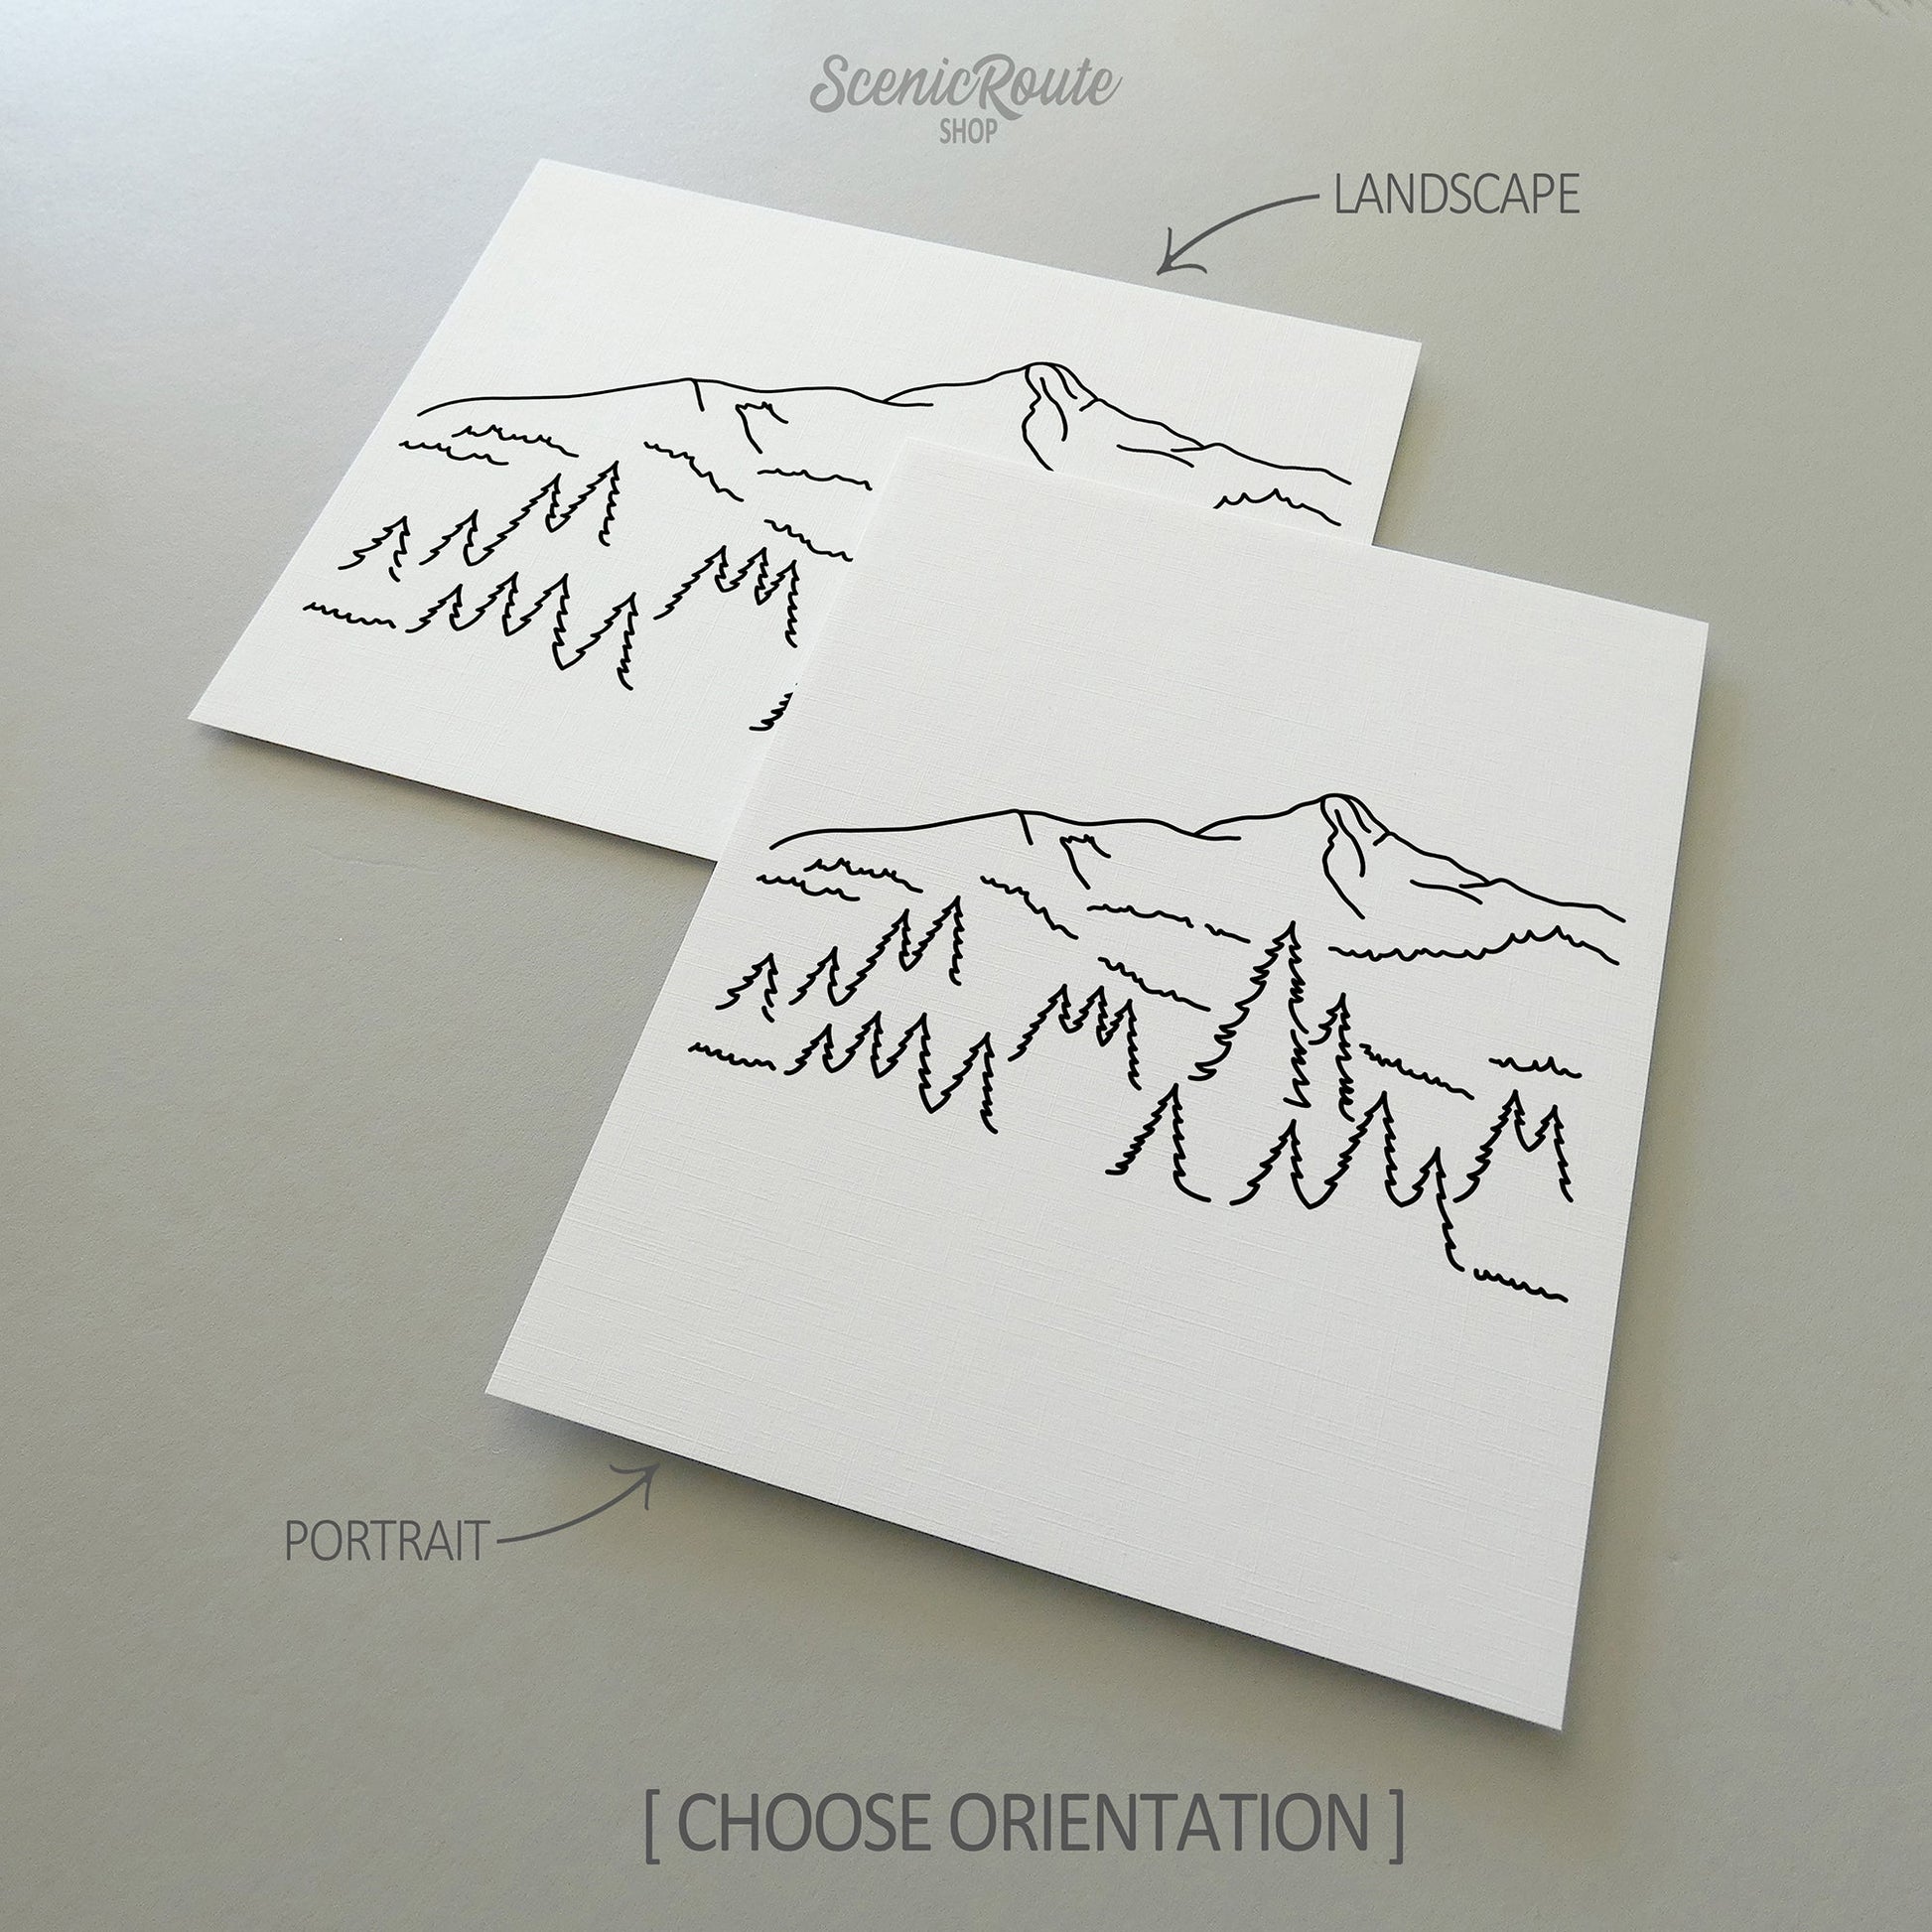 Two line art drawings of Big Sky Montana on white linen paper with a gray background.  The pieces are shown in portrait and landscape orientation for the available art print options.